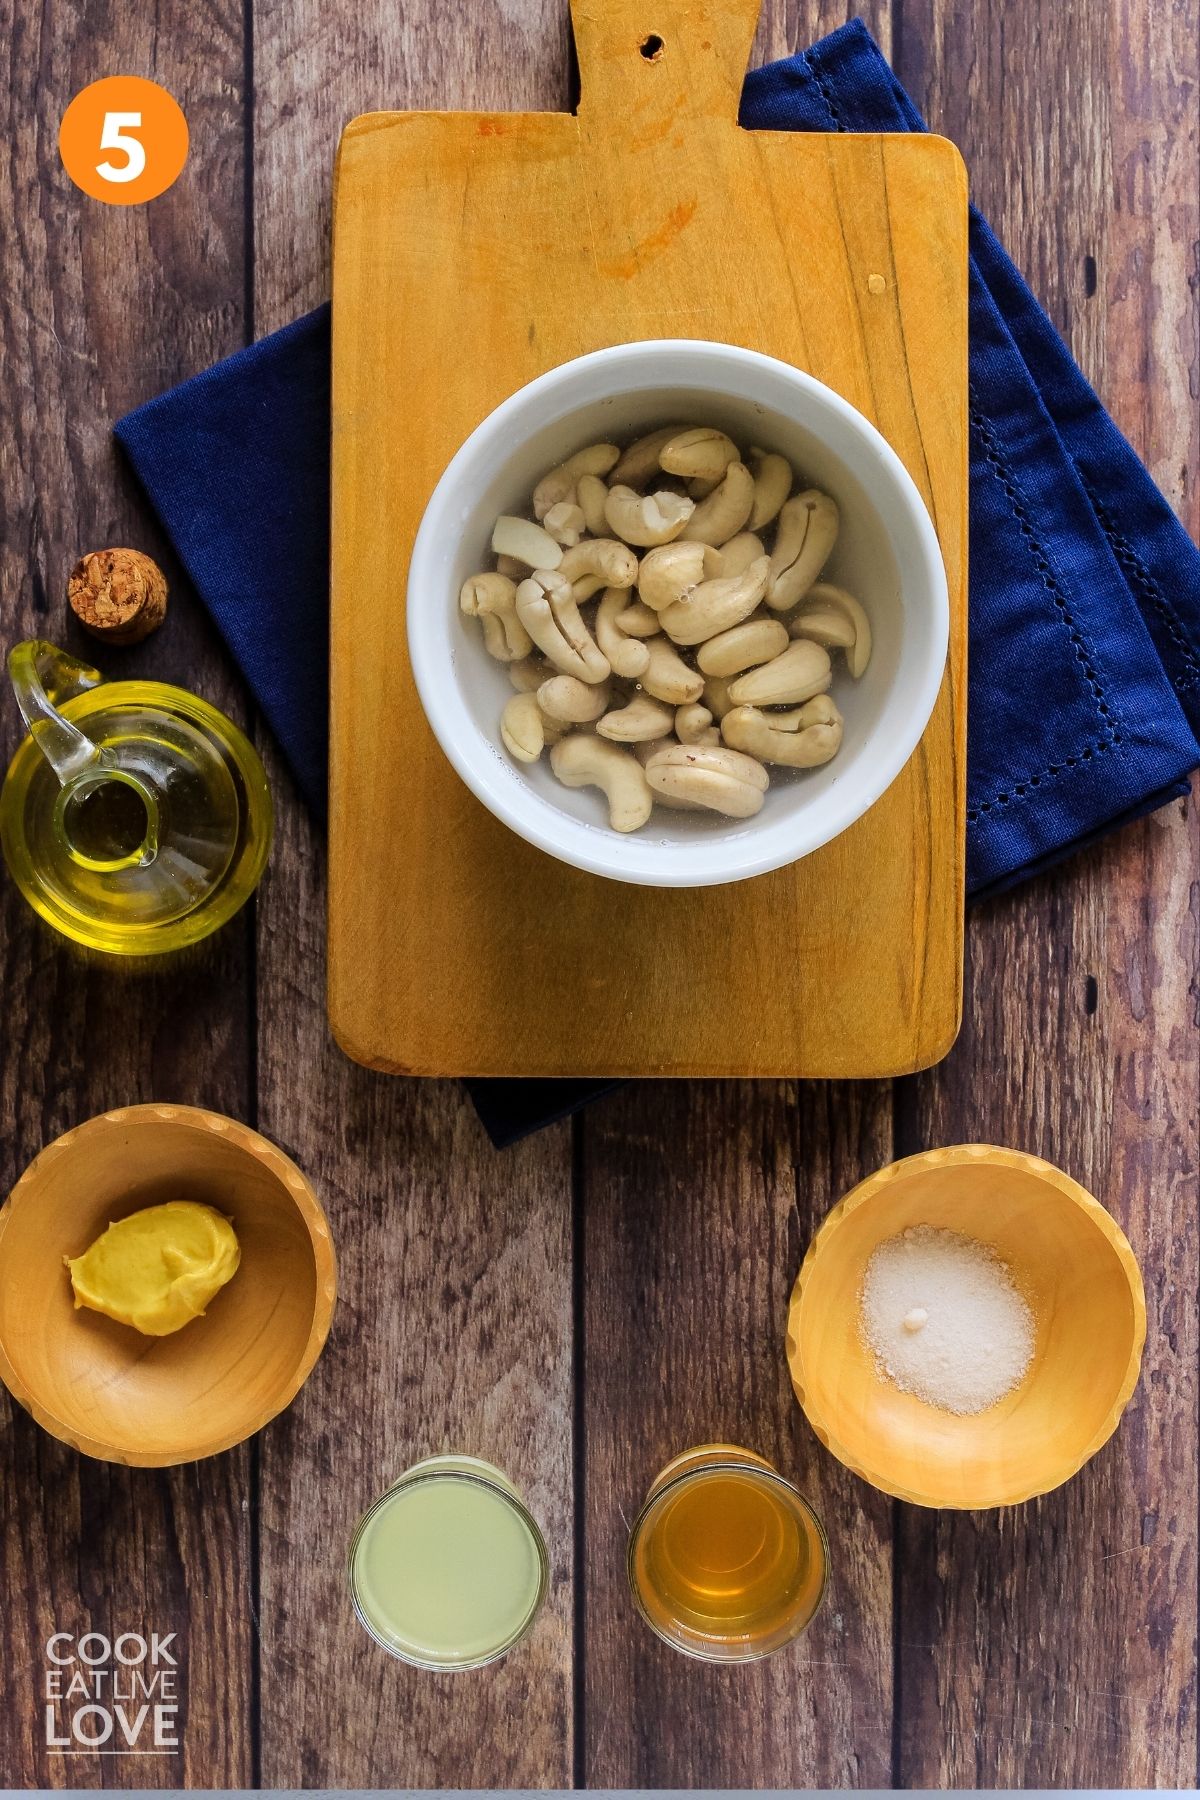 Soaked cashews in water and other ingredients gathered to make vegan roasted garlic aioli.